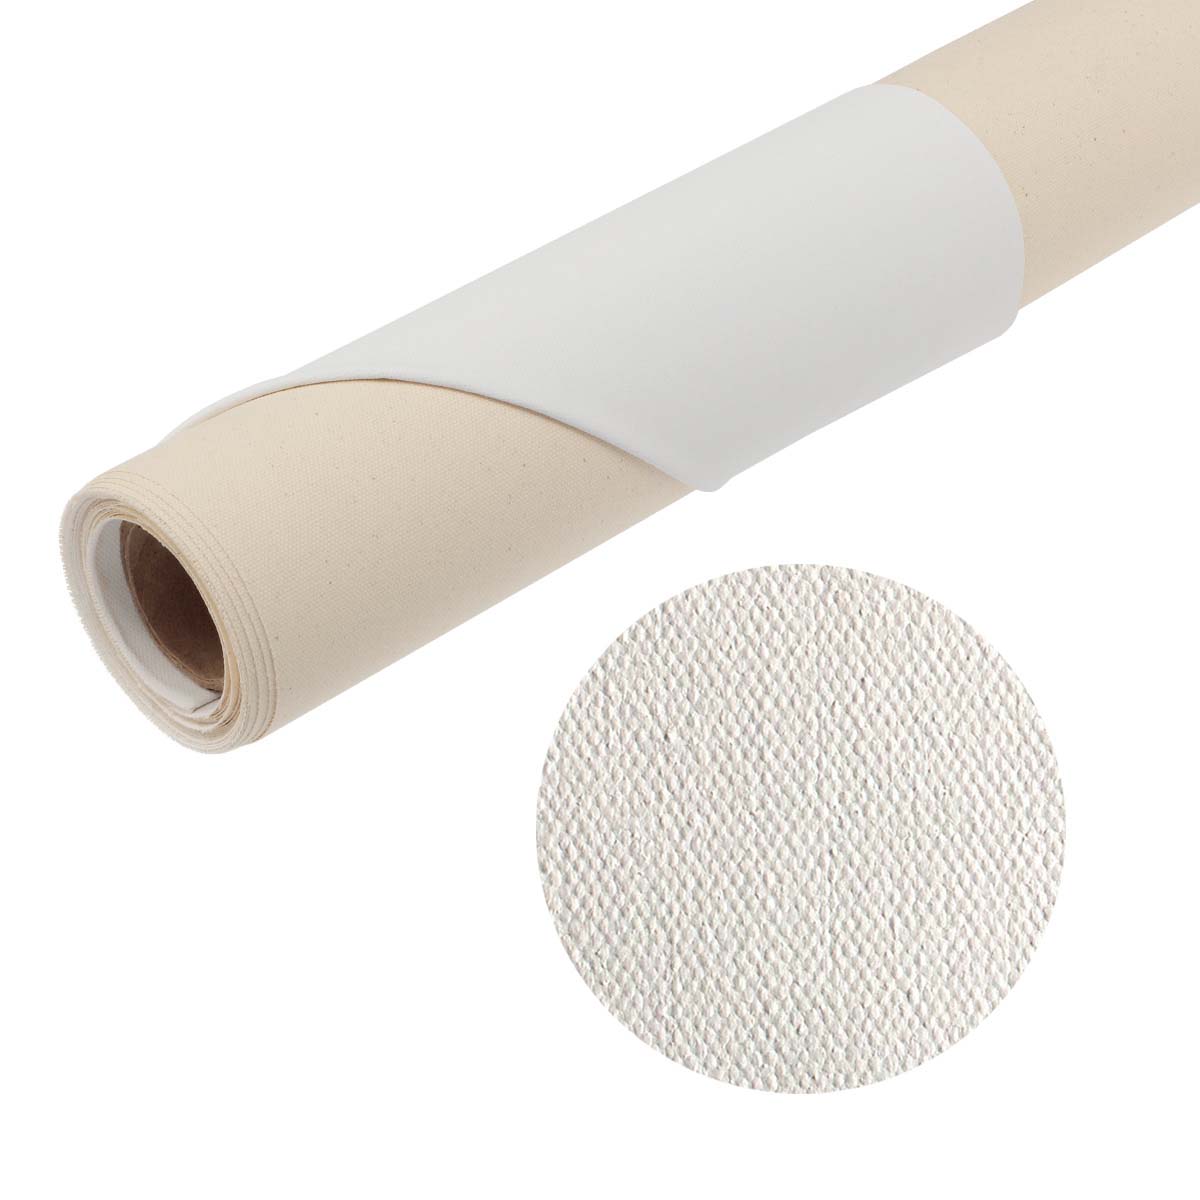 Primed Canvas Roll For Painting, #10, 60, Wholesale